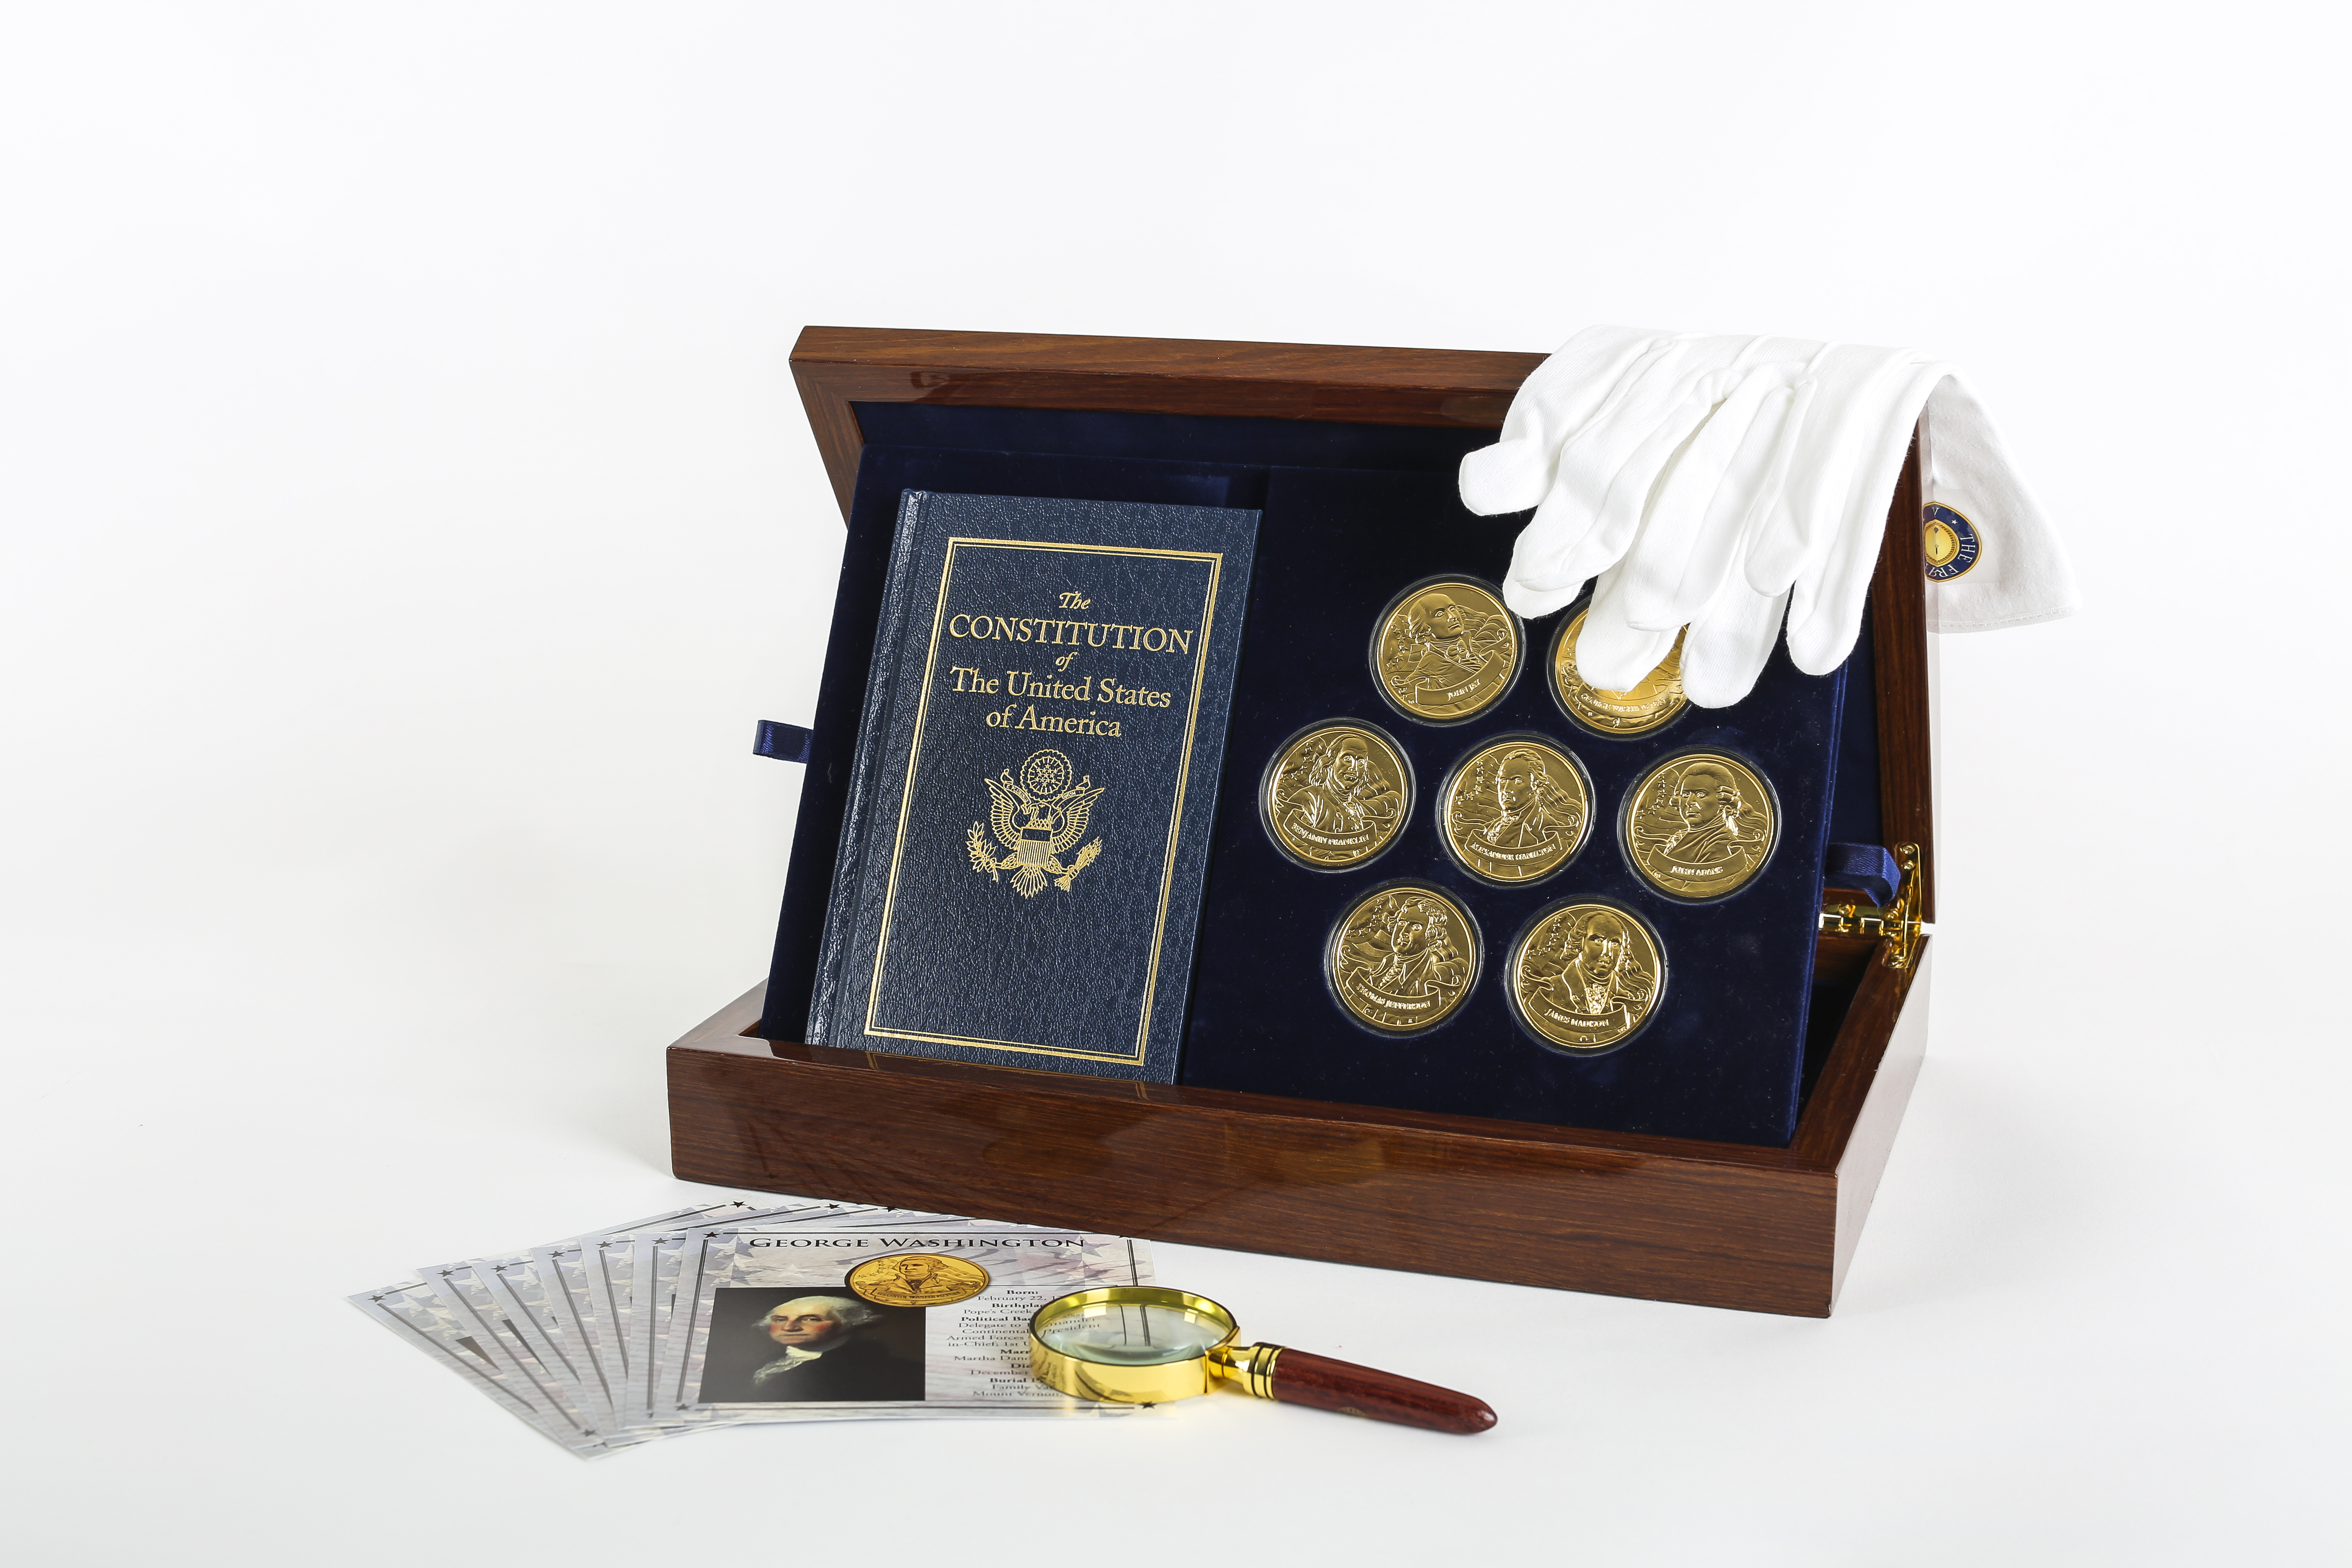 Founding Fathers of America Coin Collectionproduct featured image thumbnail.